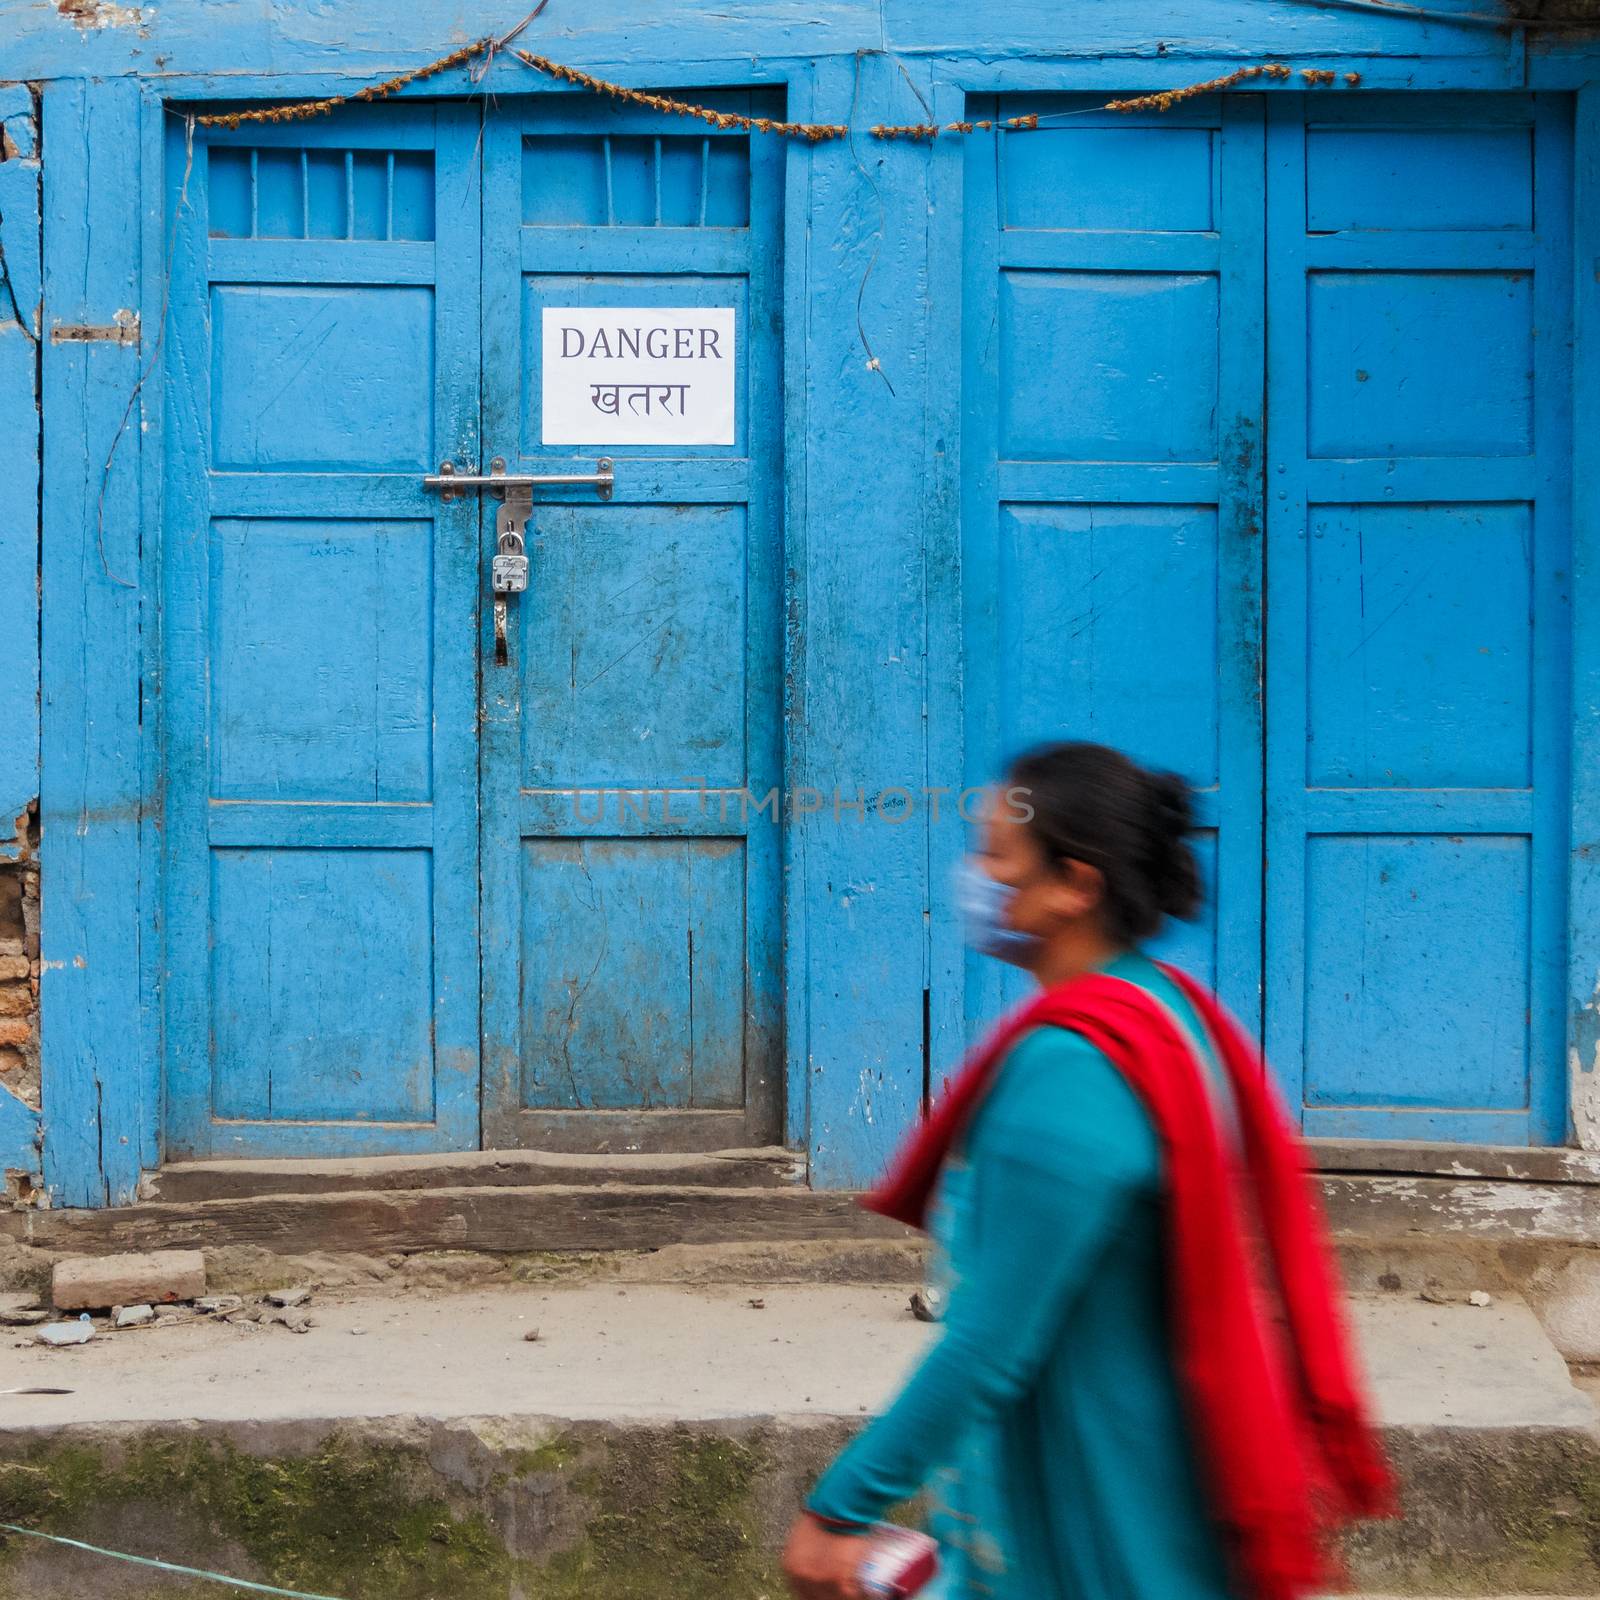 KATHMANDU, NEPAL - MAY 11, 2015: A woman walks past a danger sign on an old traditional house in Handigaun.